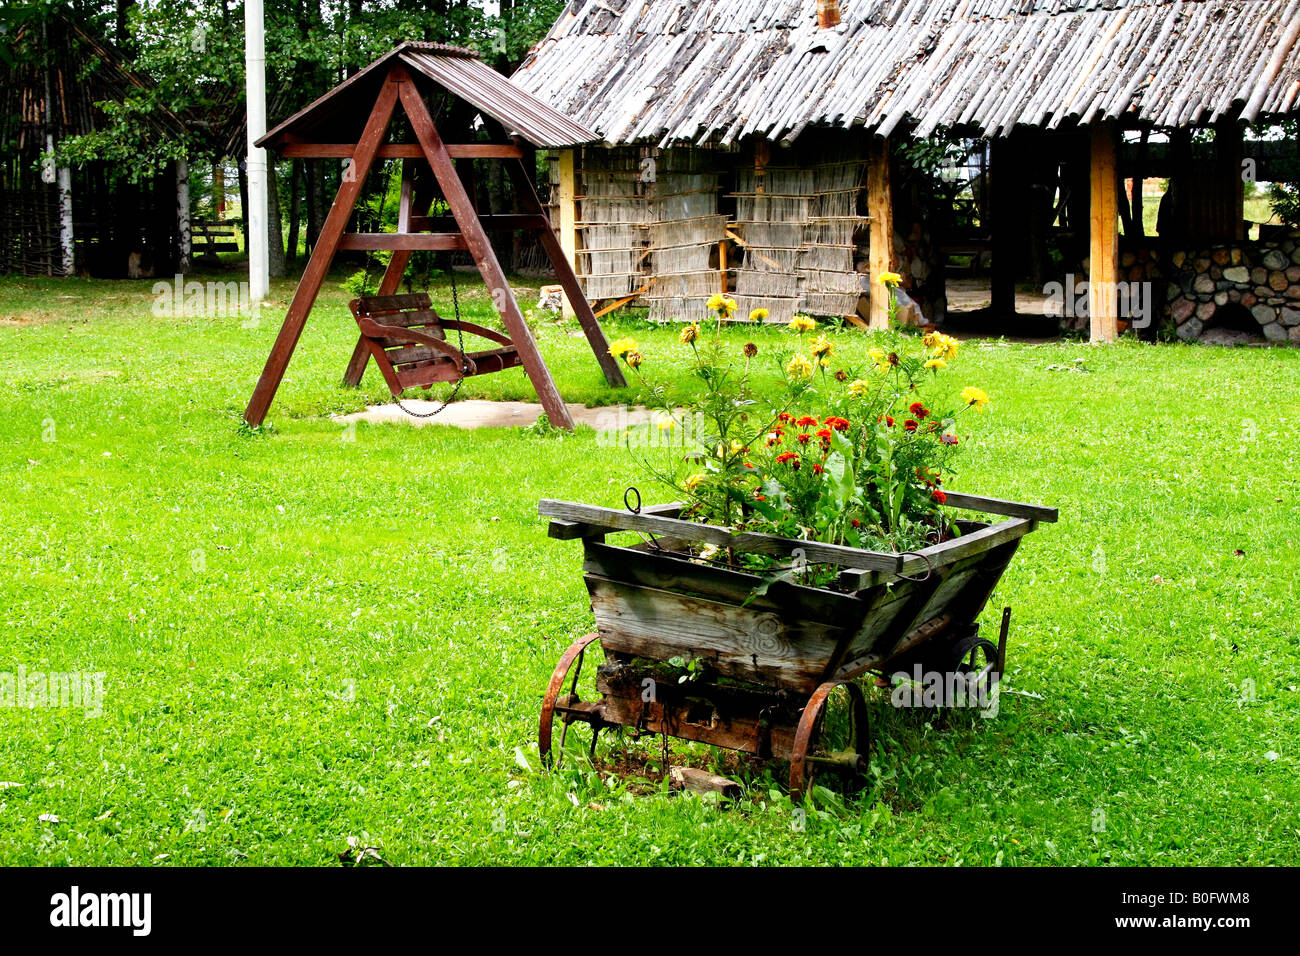 Flower Carriage (cart), swing and a wooden hut at grassy meadow. Dudutki Village, Belarus, September 2007 Stock Photo